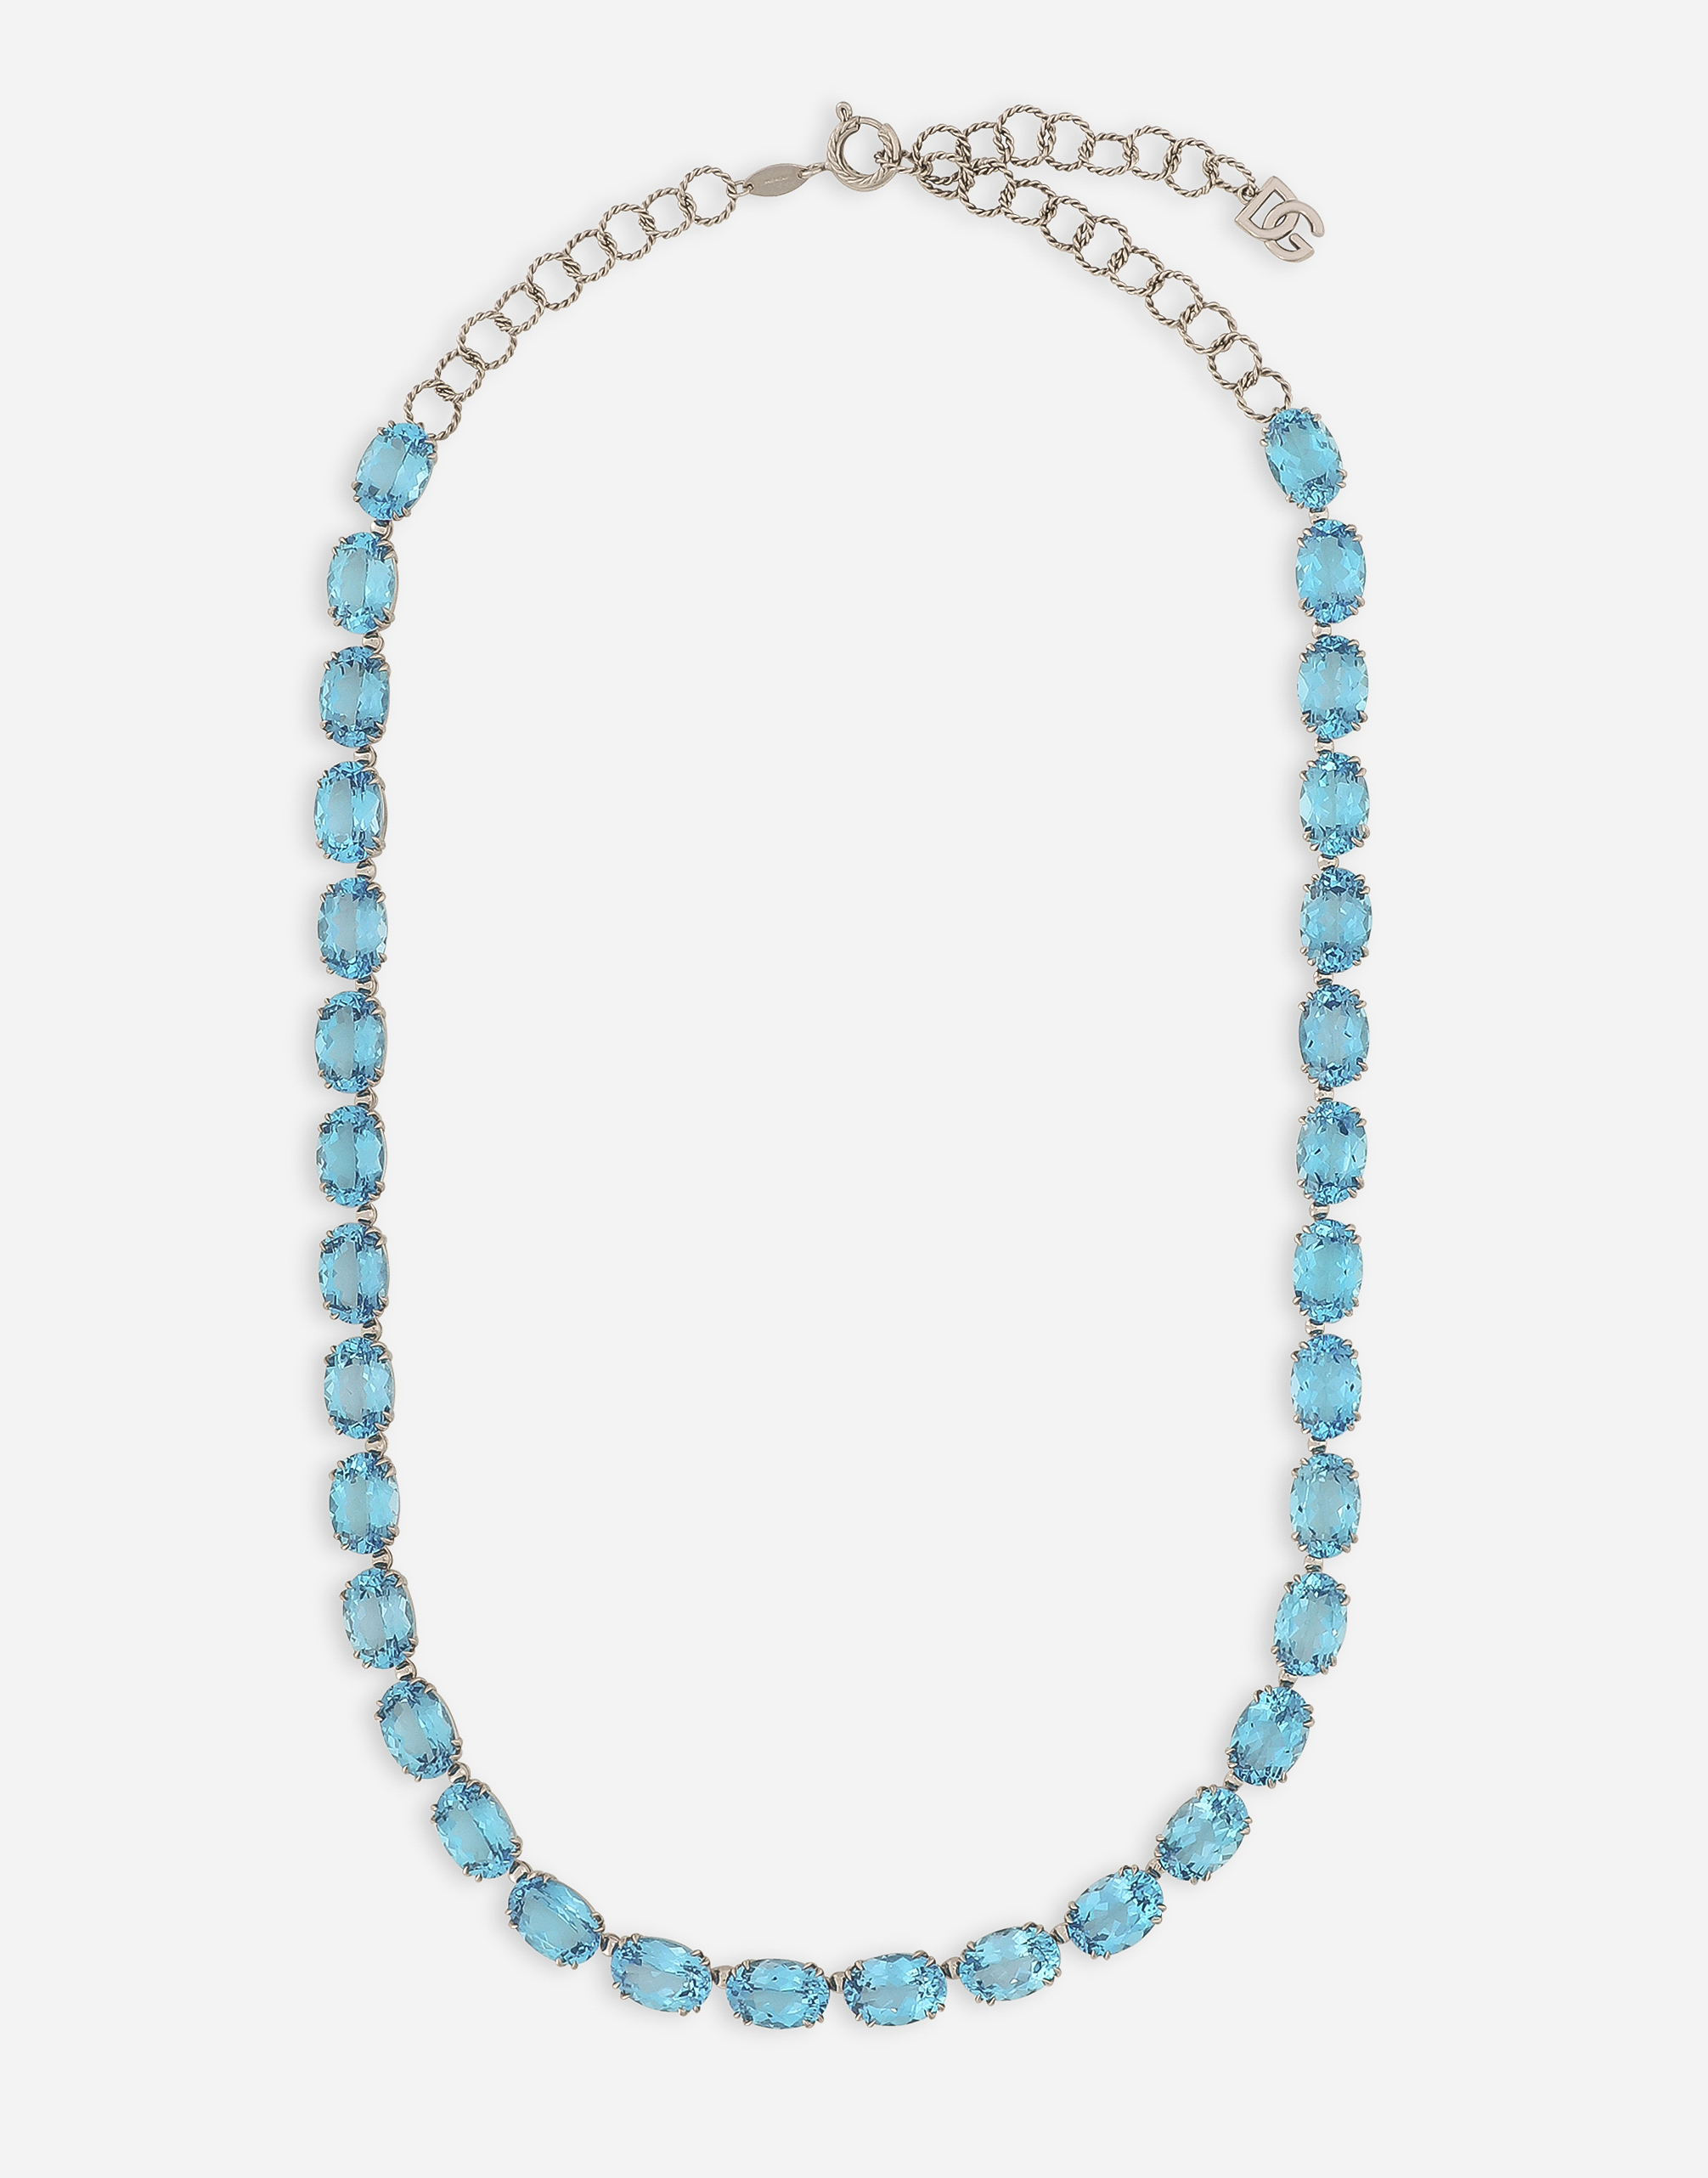 Dolce & Gabbana Anna Necklace In White Gold 18kt With Light Blue Topazes